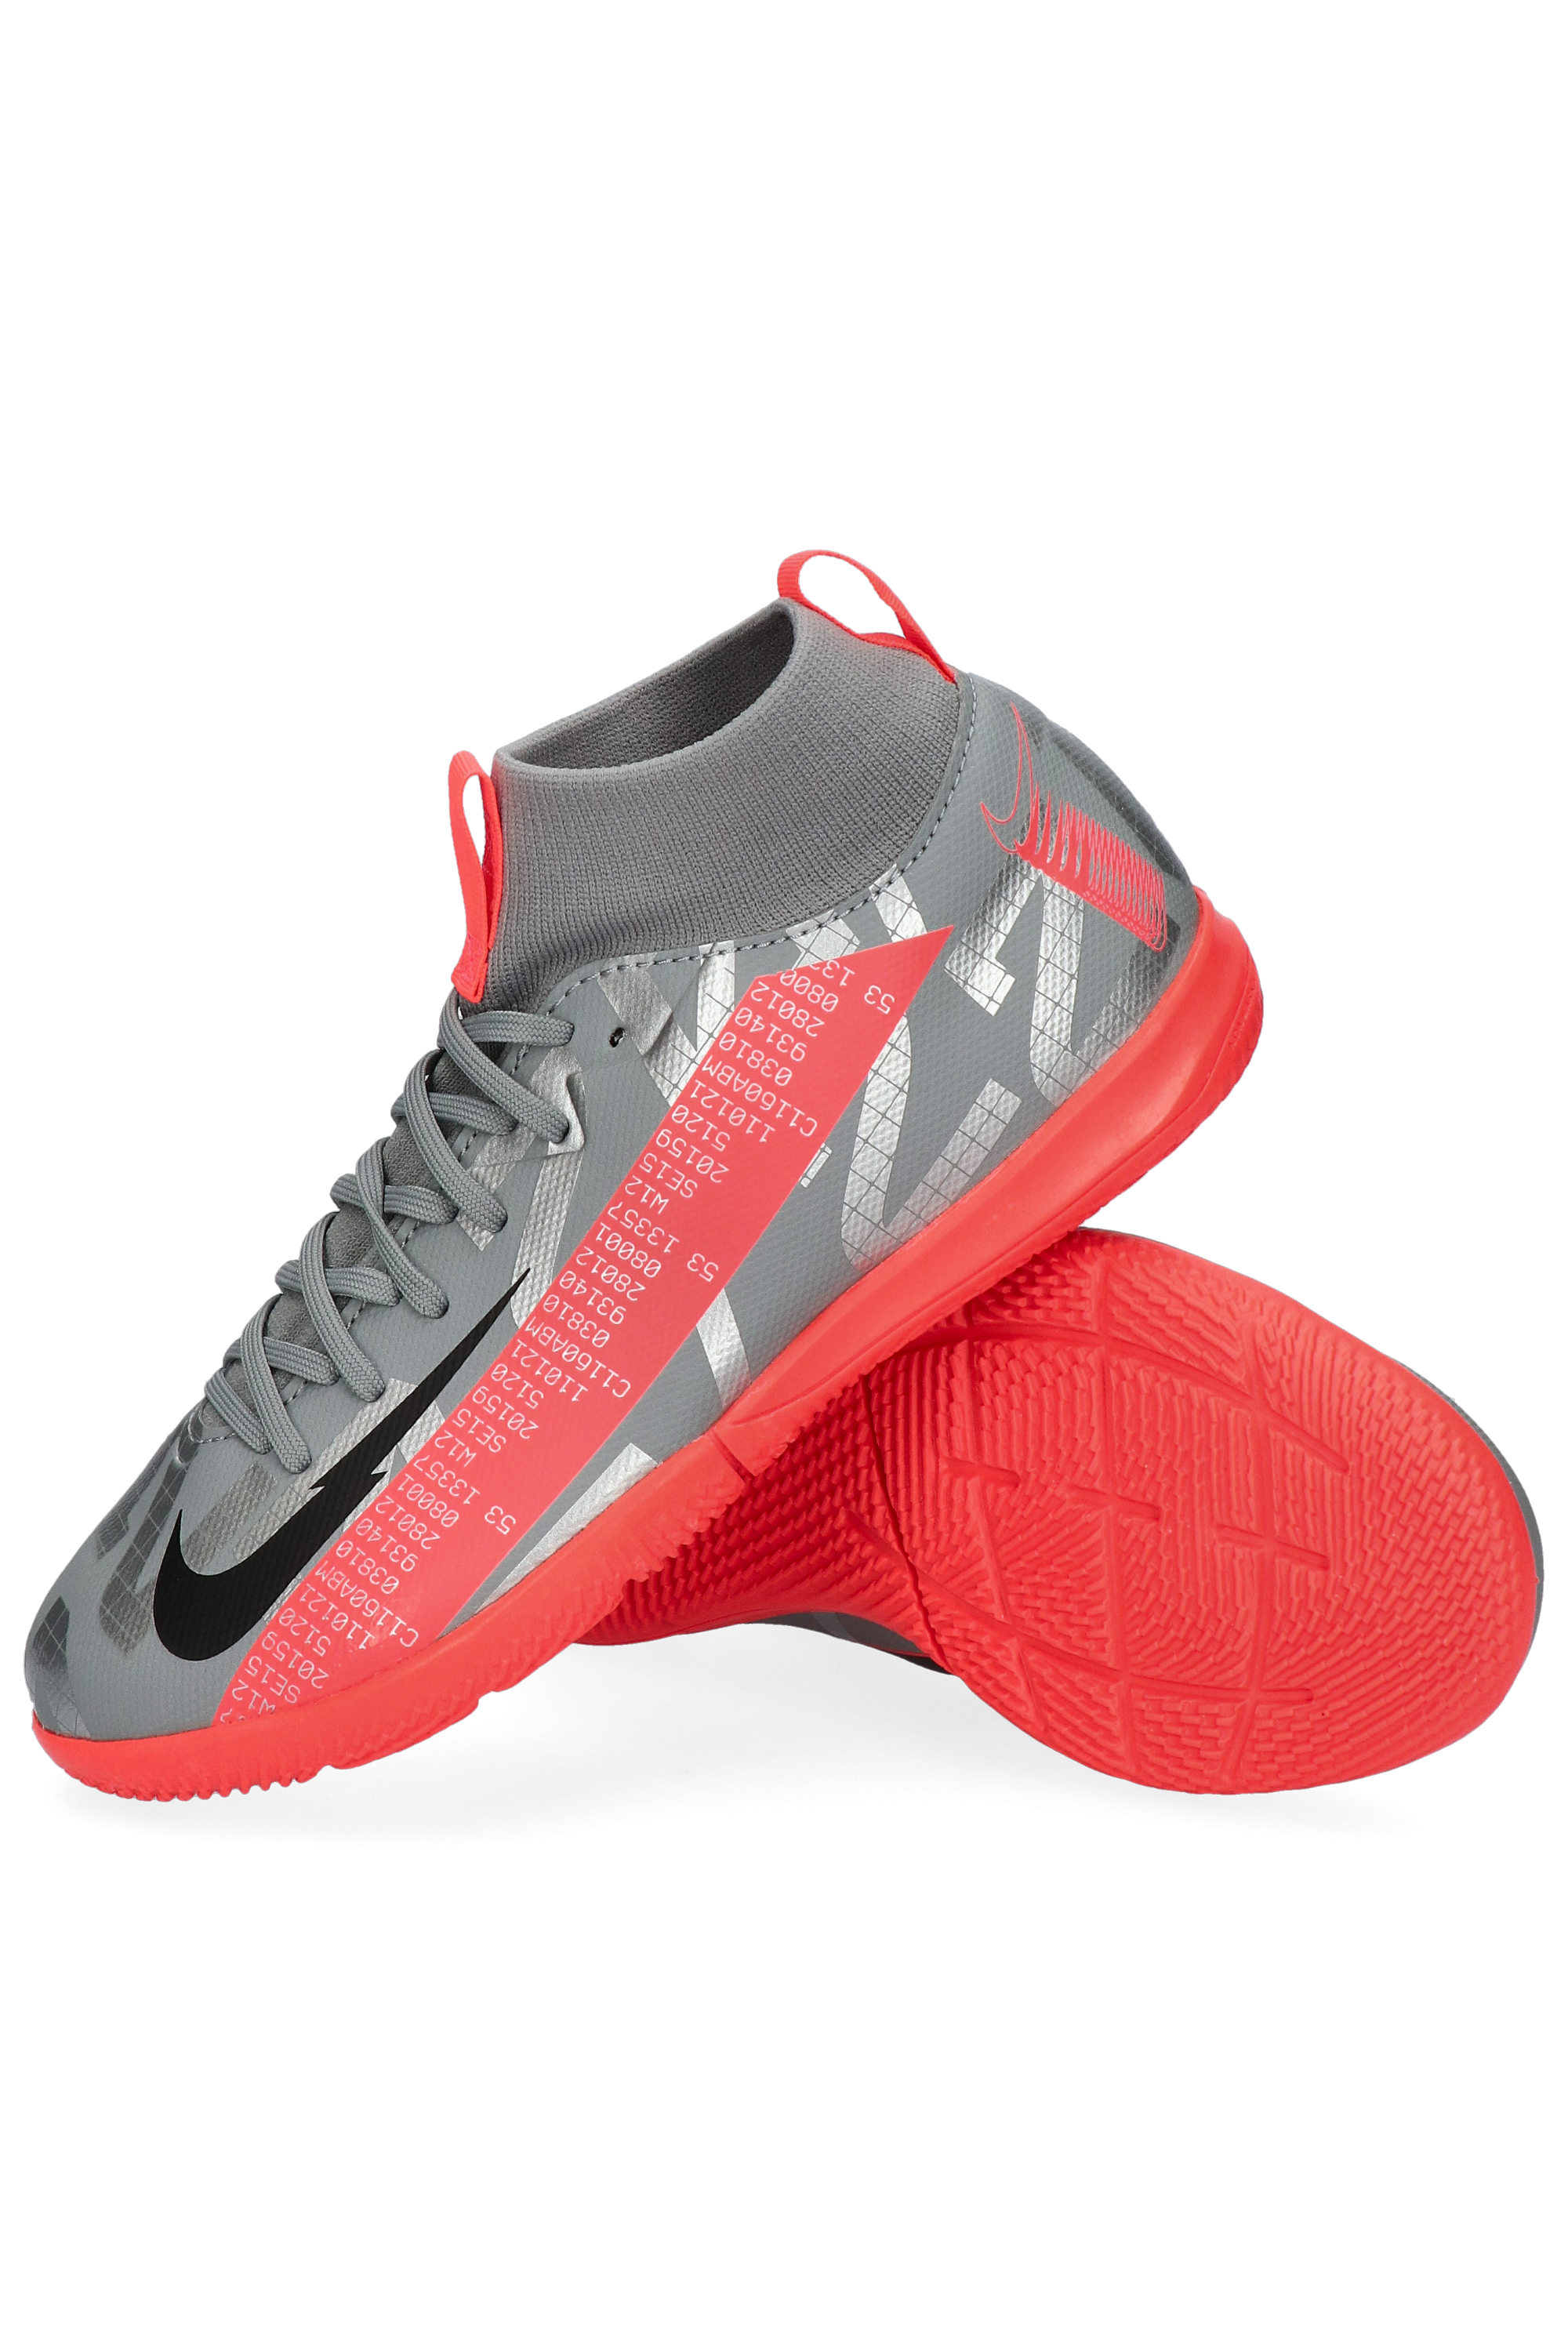 Nike JR. Mercurial Superfly 7 Academy IC 6 Youth US